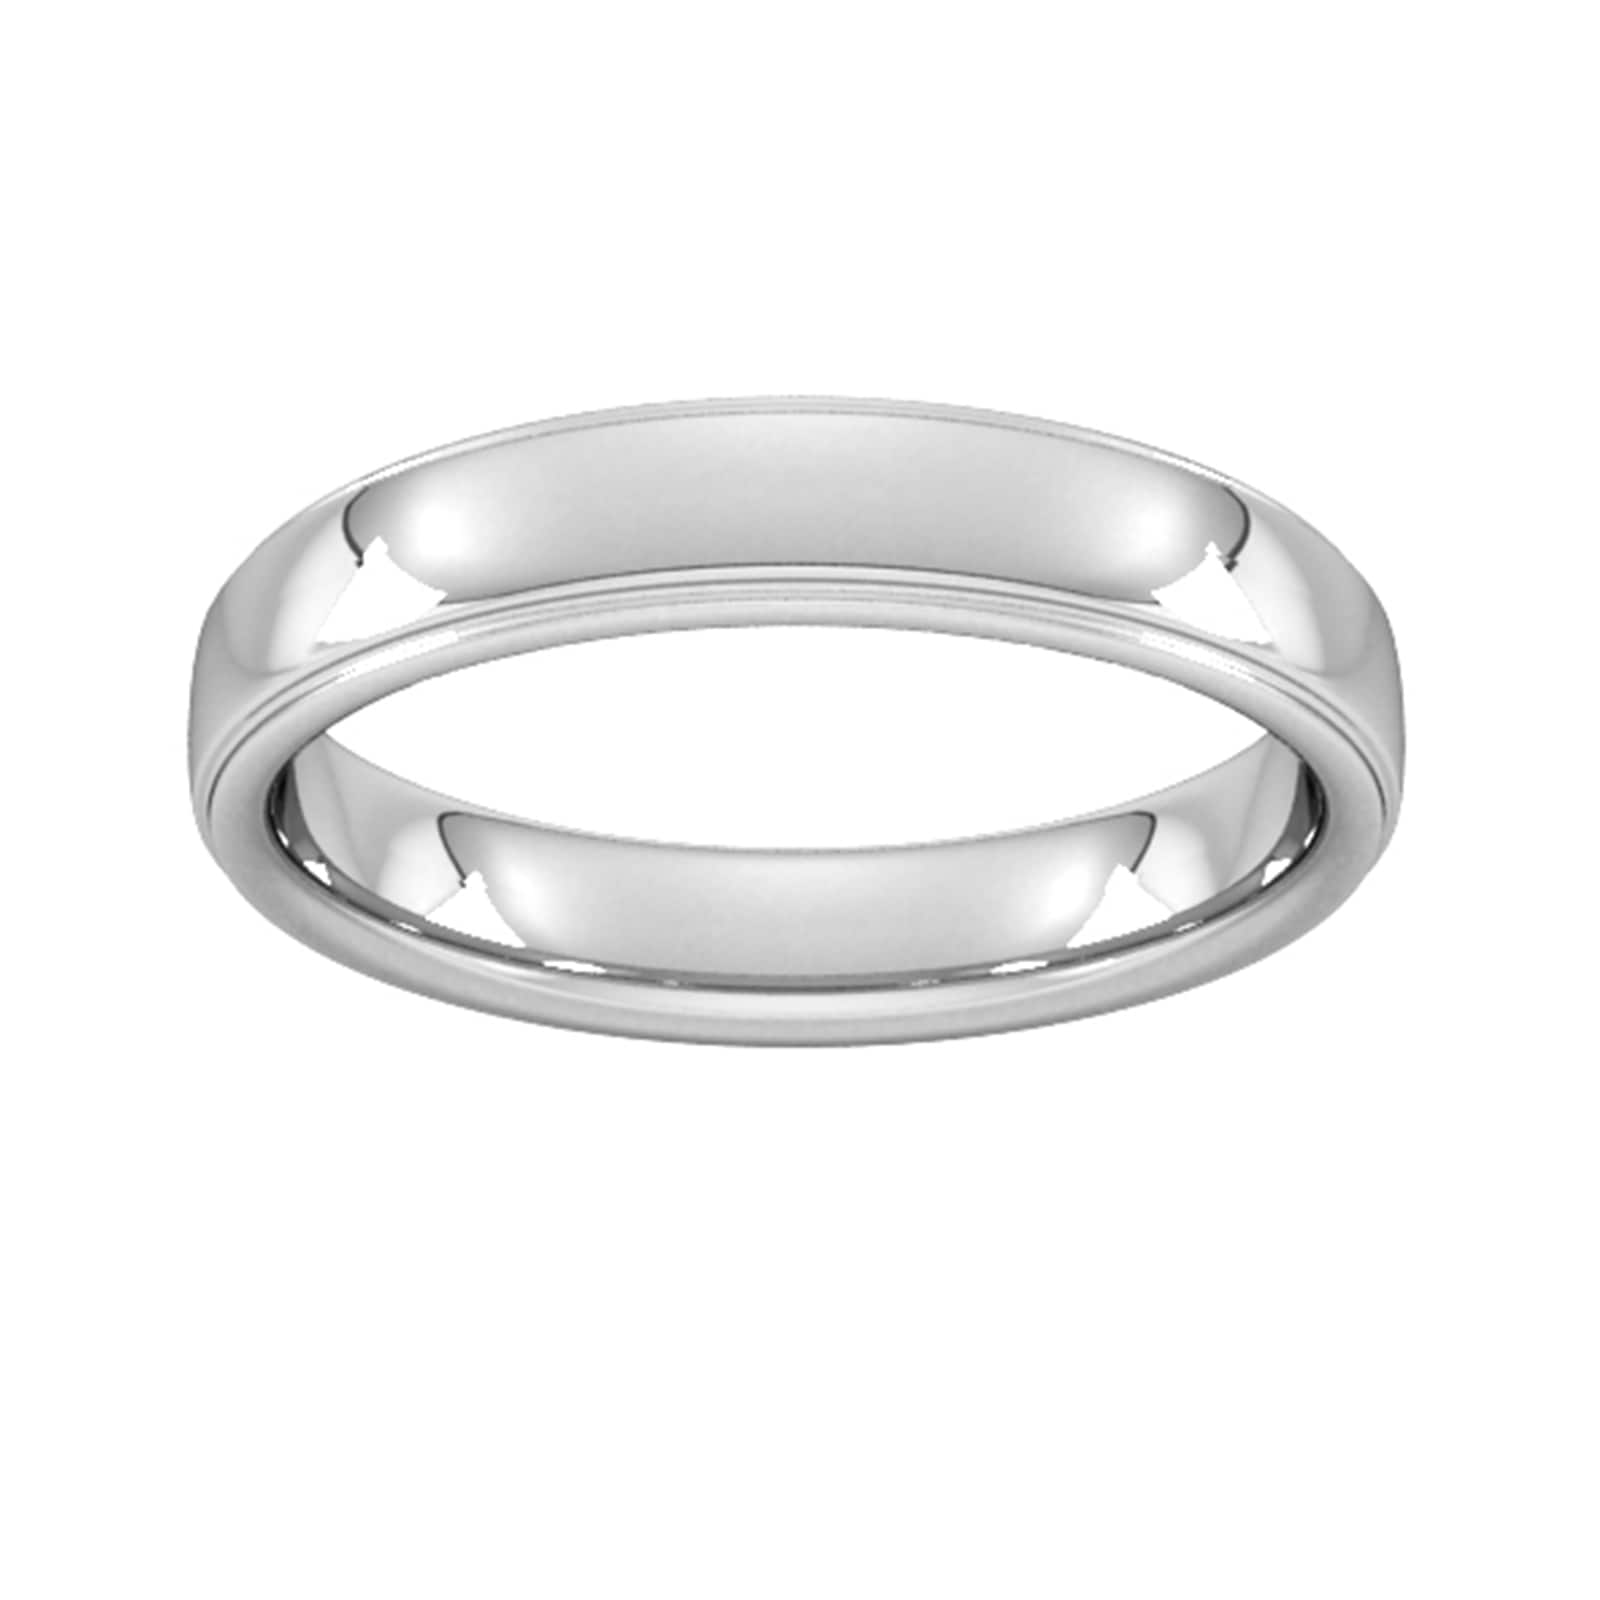 4mm Flat Court Heavy Polished Finish With Grooves Wedding Ring In 18 Carat White Gold - Ring Size W